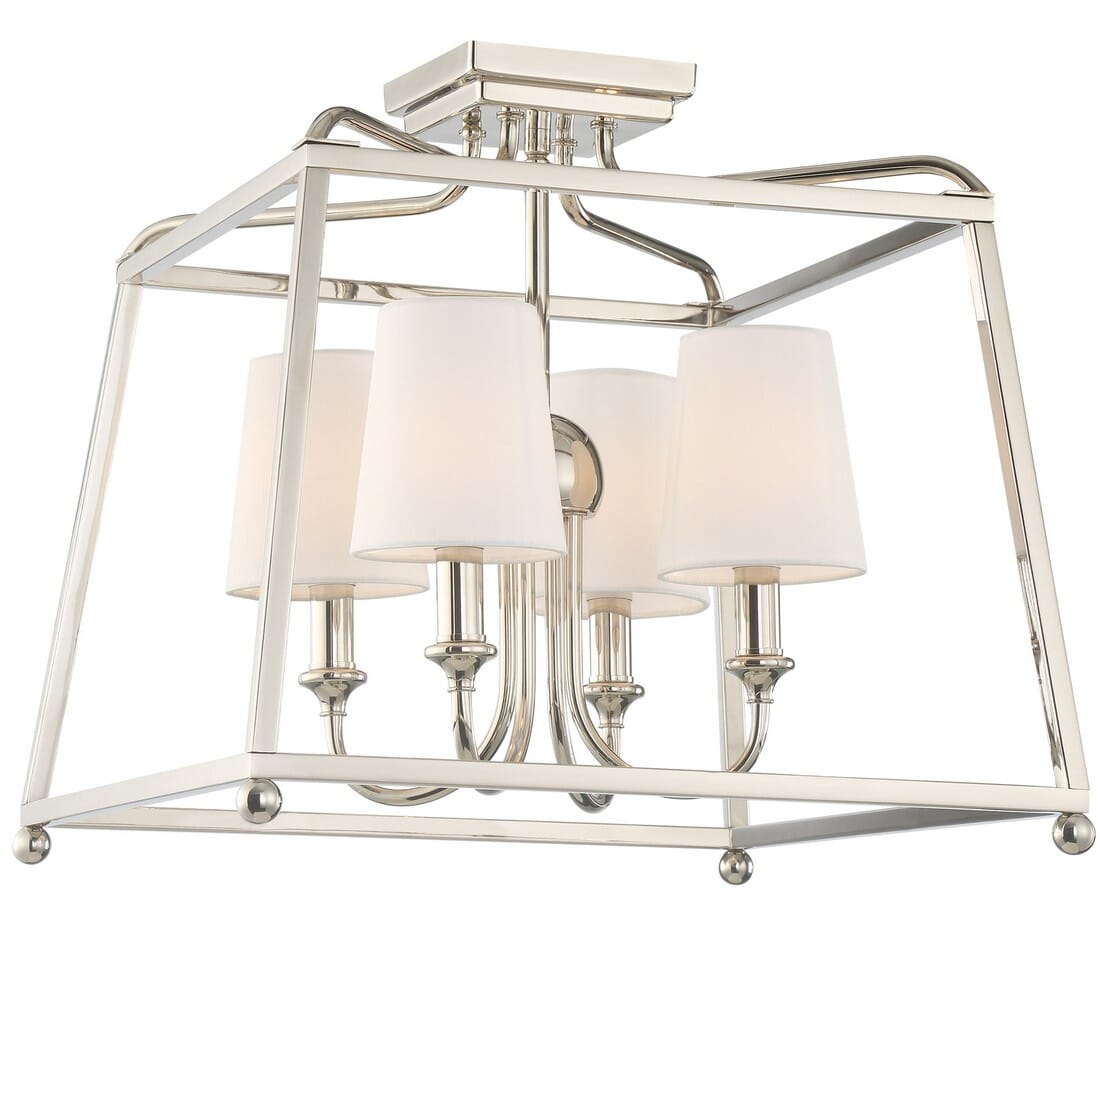 Libby Langdon for Sylvan 16" Ceiling Light in Polished Nickel